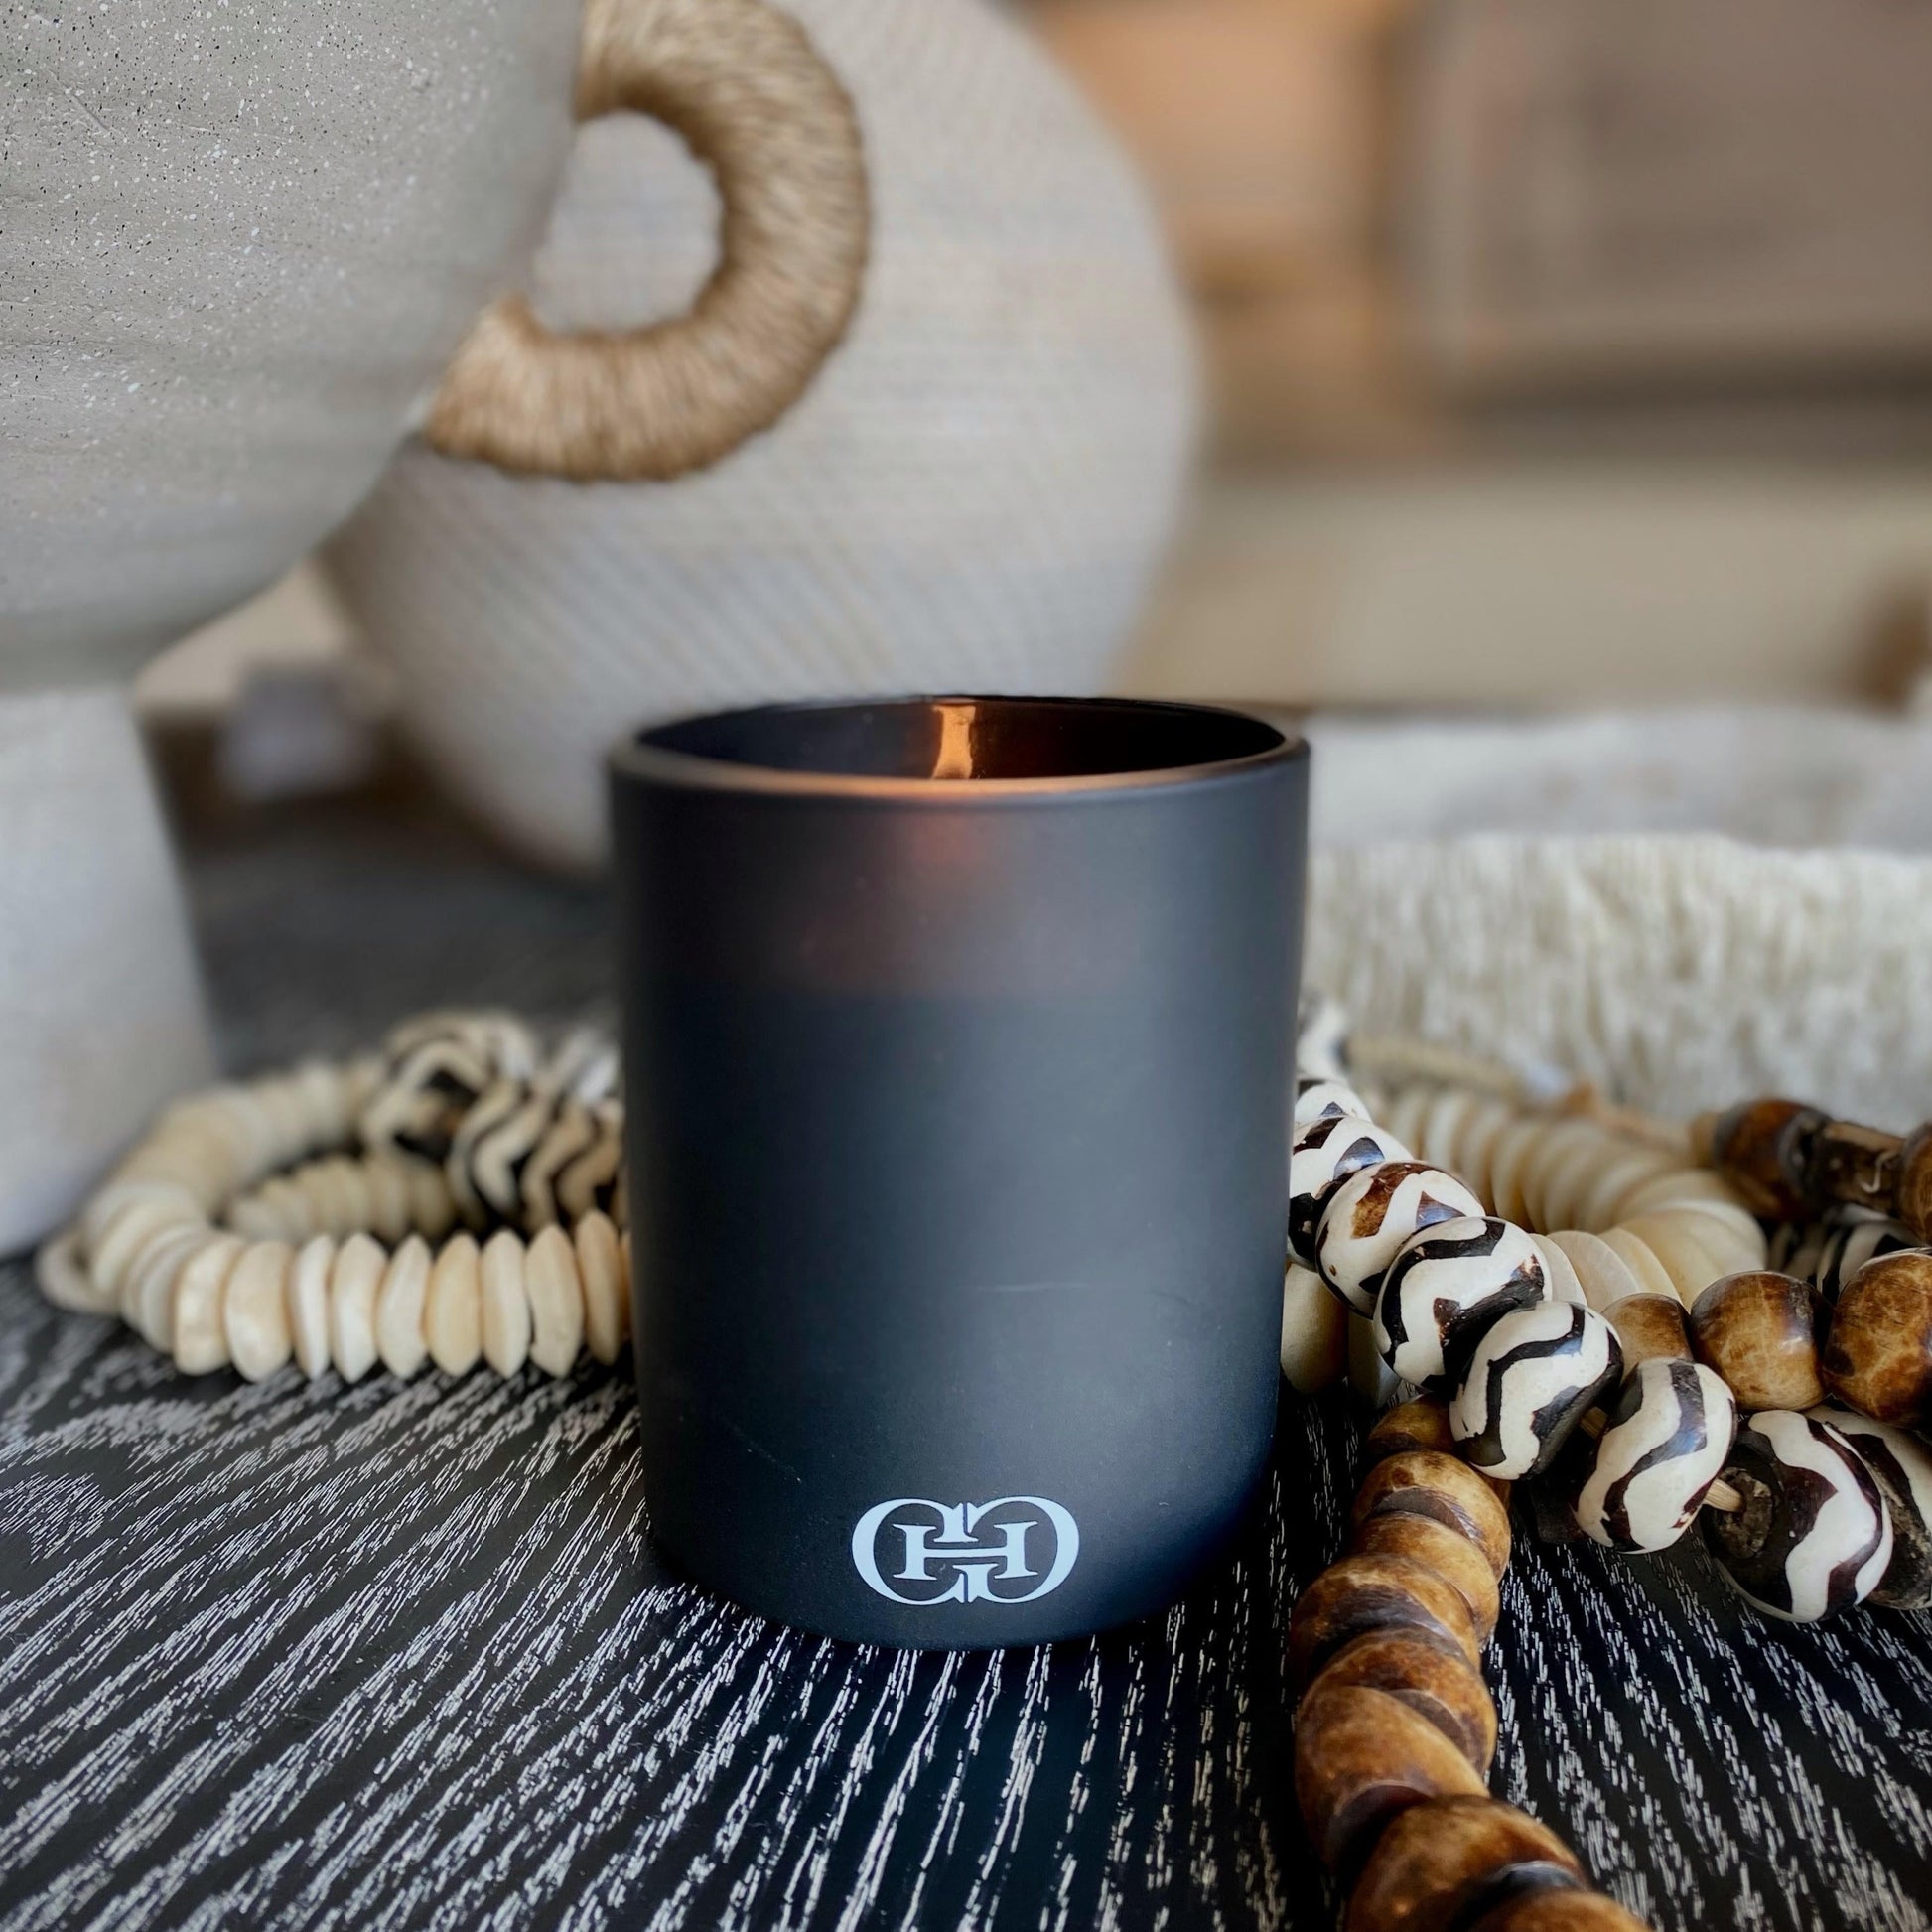 Clayton Gray Home Graphite Candle – CLAYTON GRAY HOME